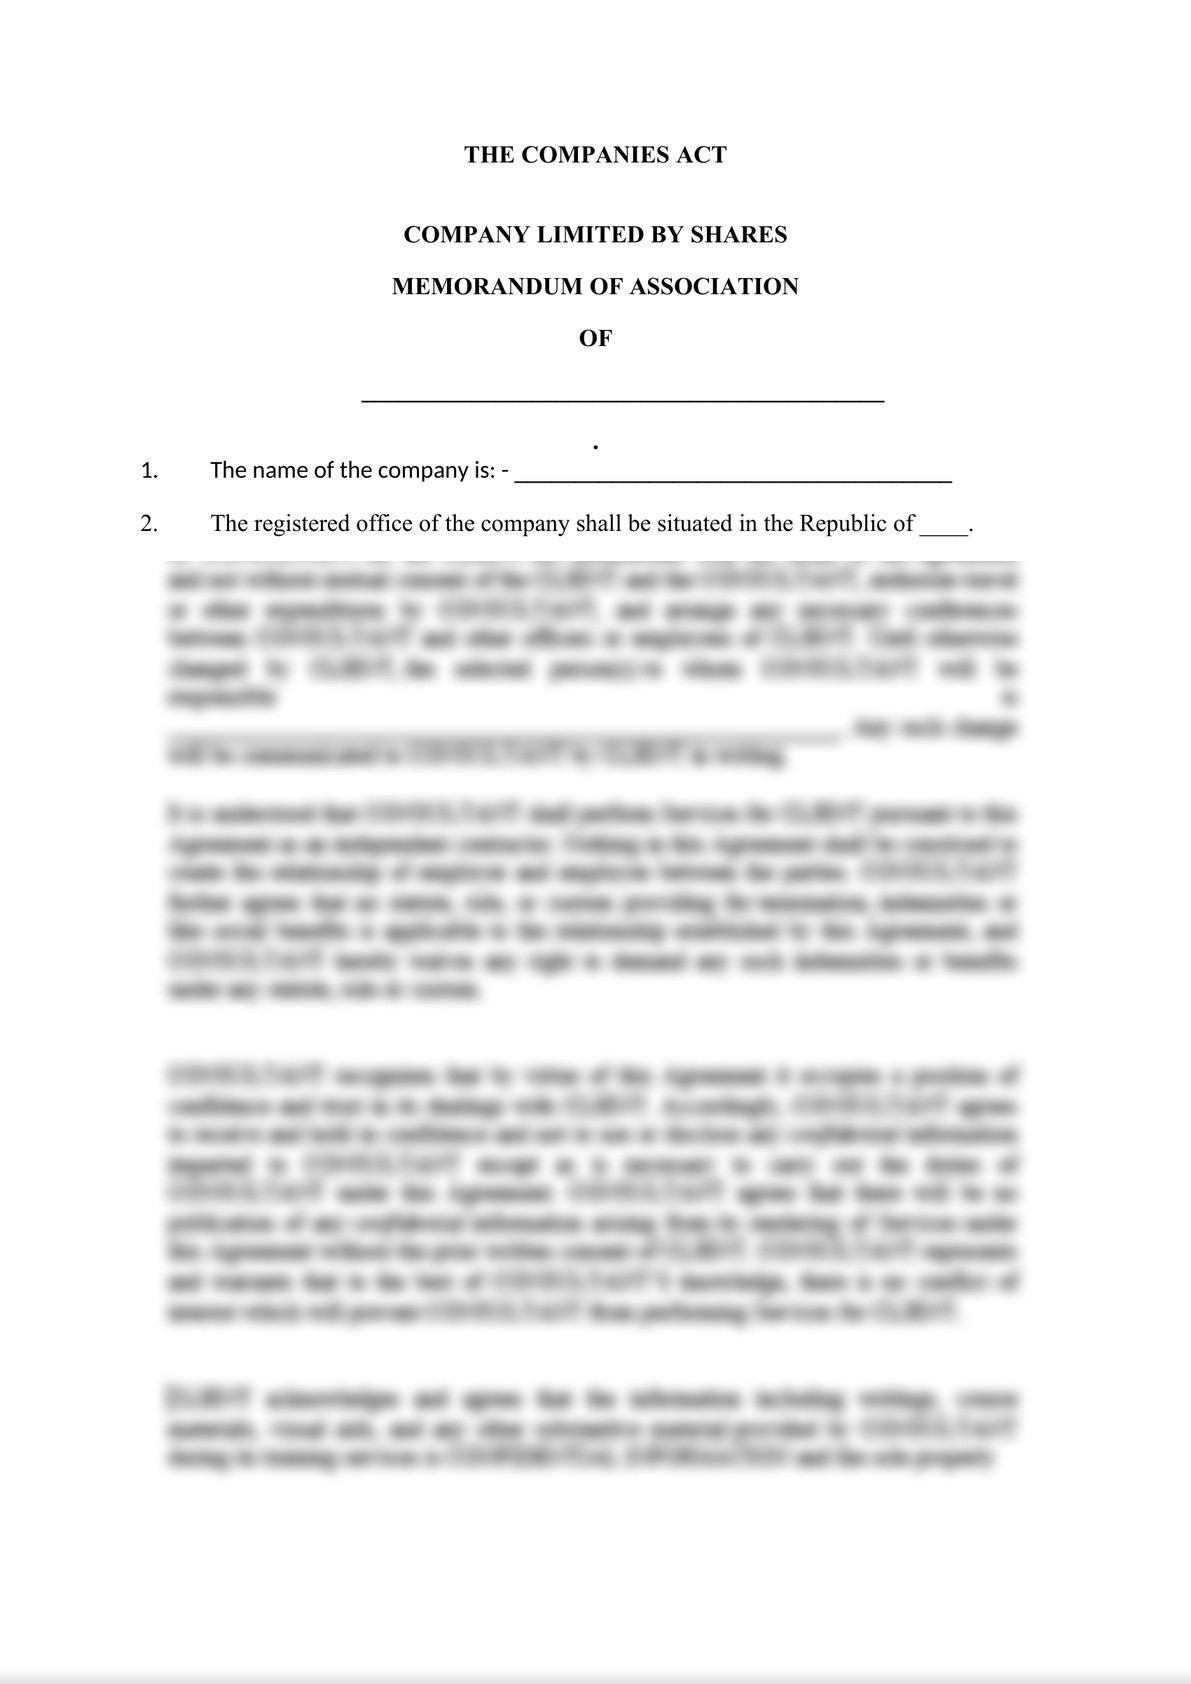 MEMORANDUM AND ARTICLES OF ASSOCIATION OF COMPANY LIMITED BY SHARES-1